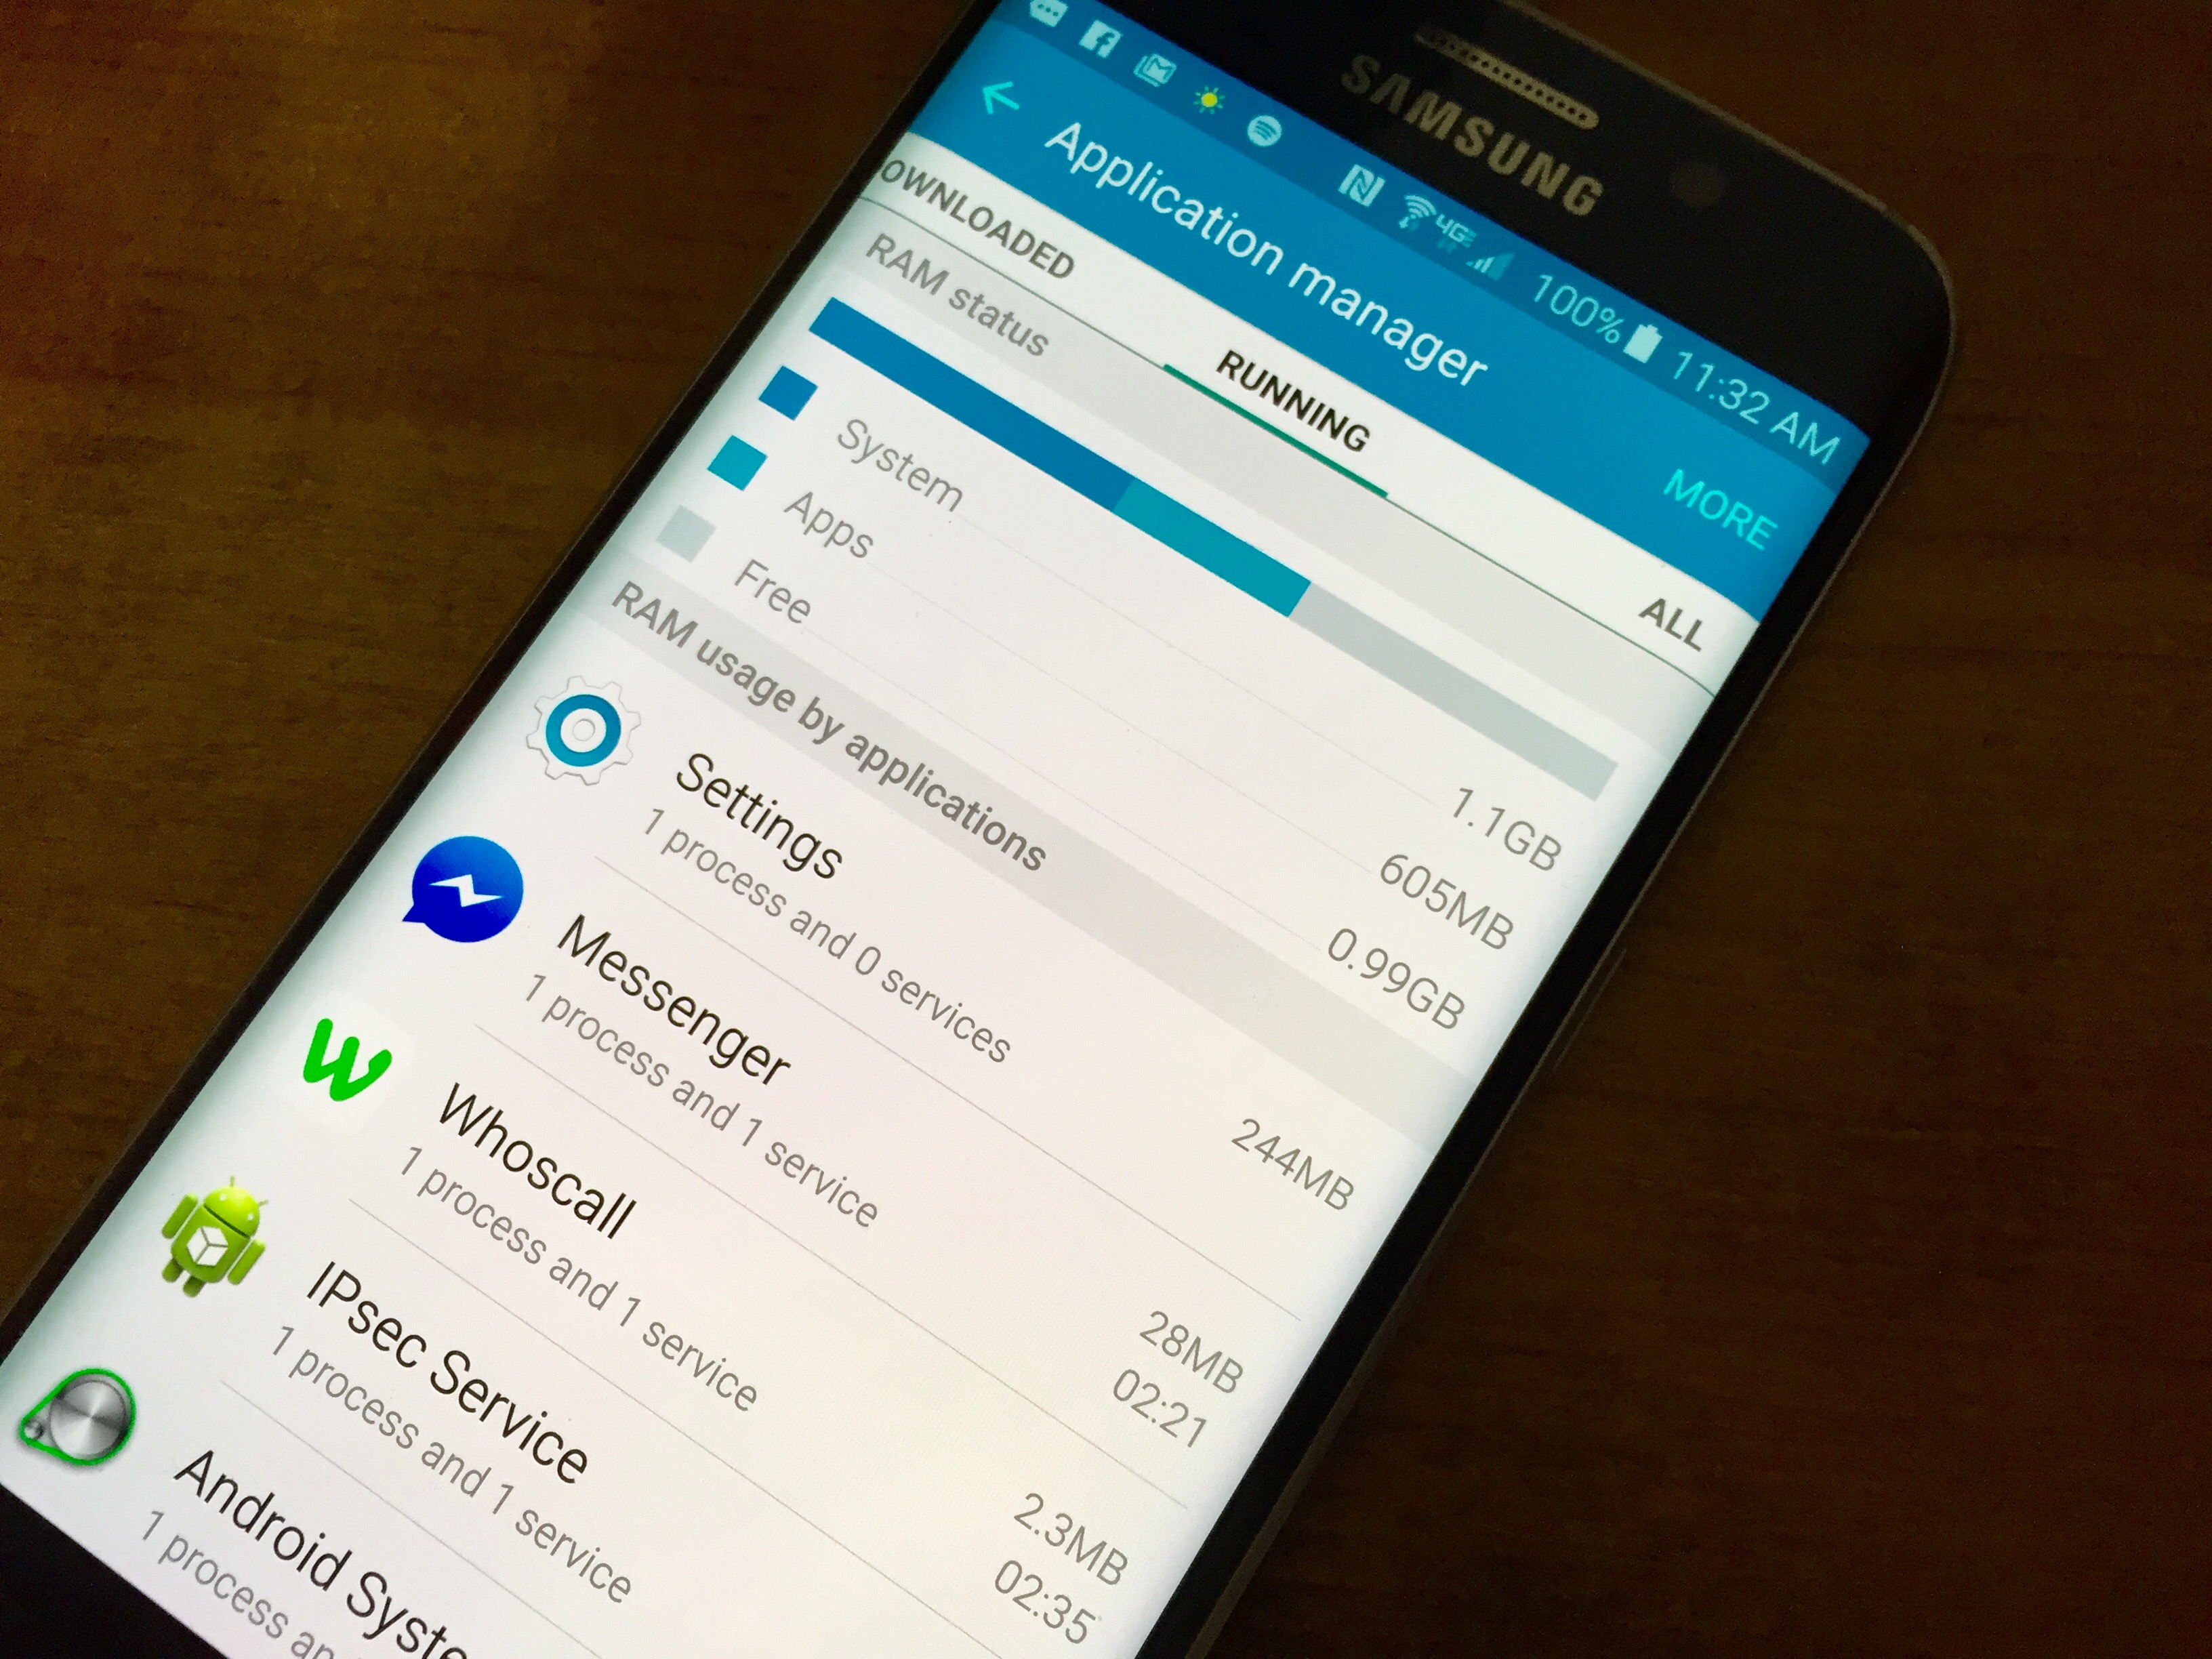 There is a confirmed Galaxy S6 and Galaxy S6 Edge problem with memory.